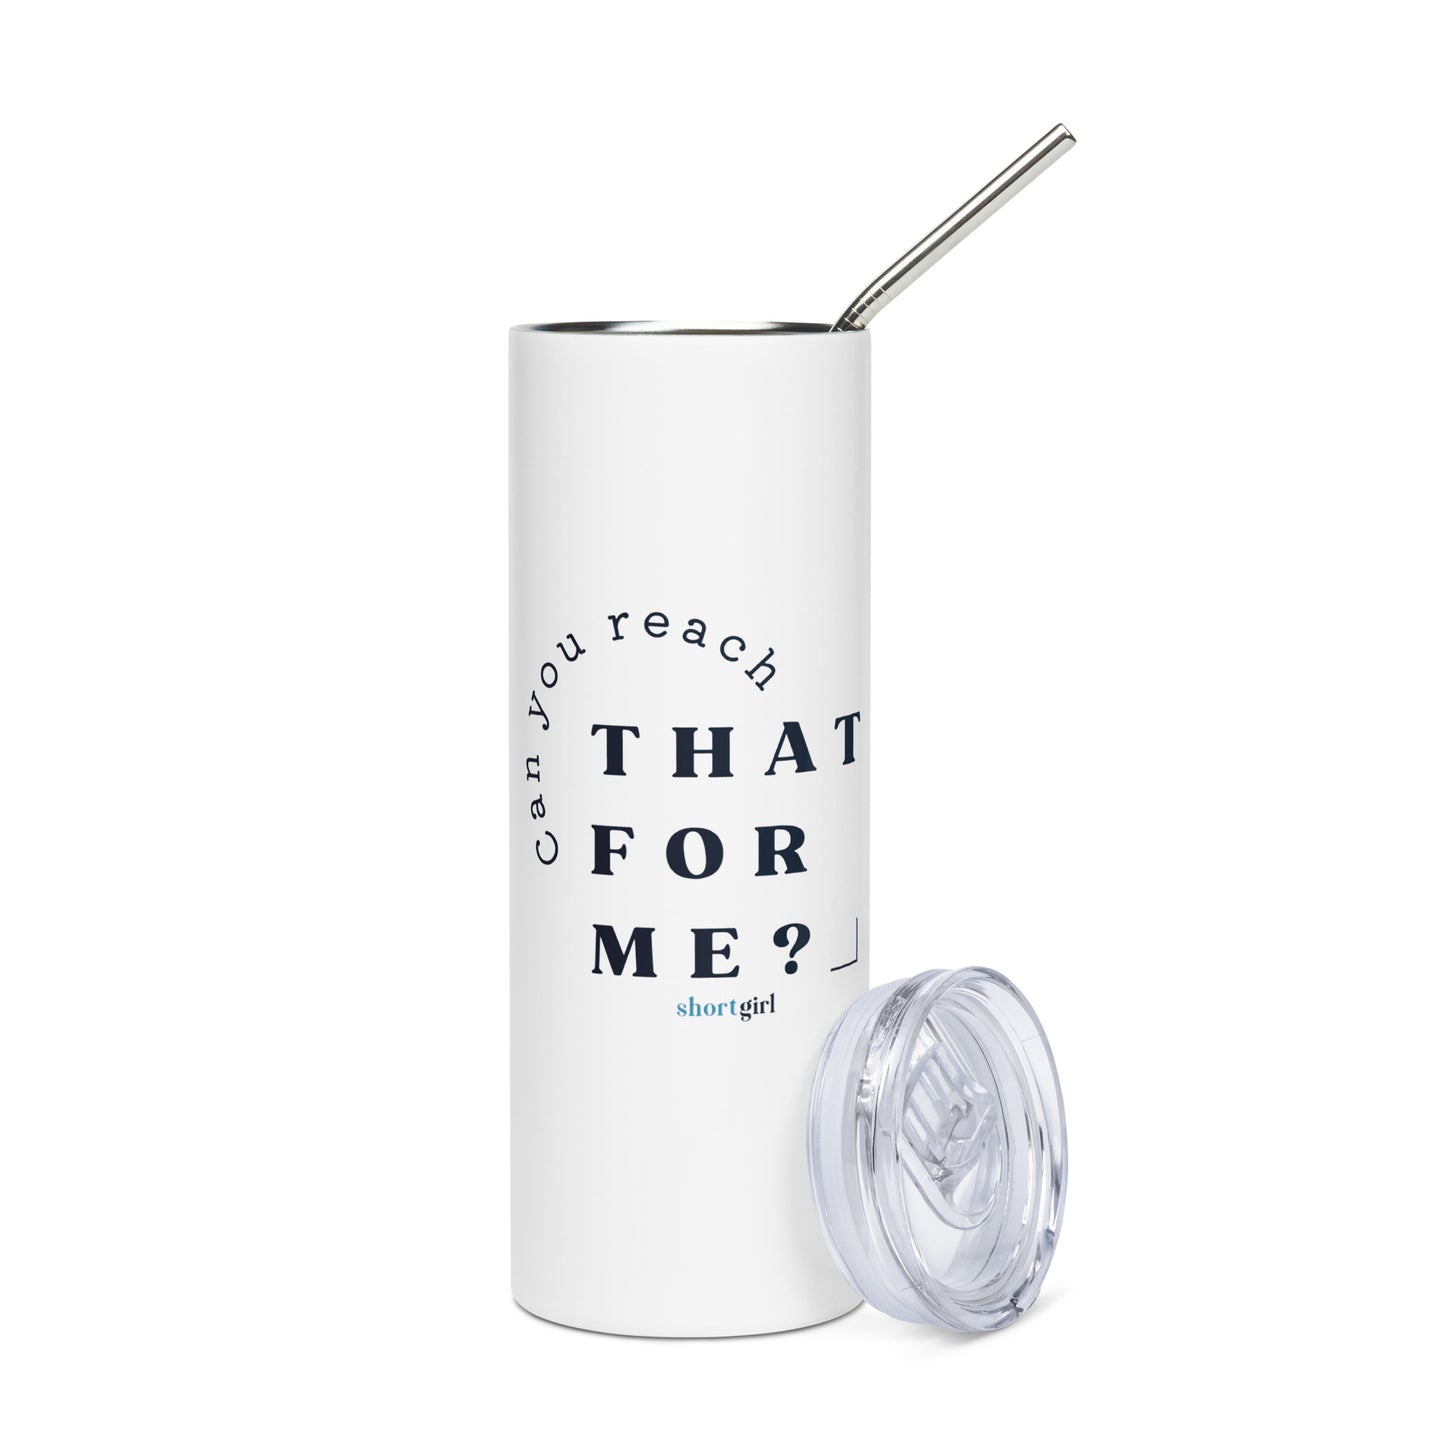 Stainless steel tumbler - Can you reach that for me?